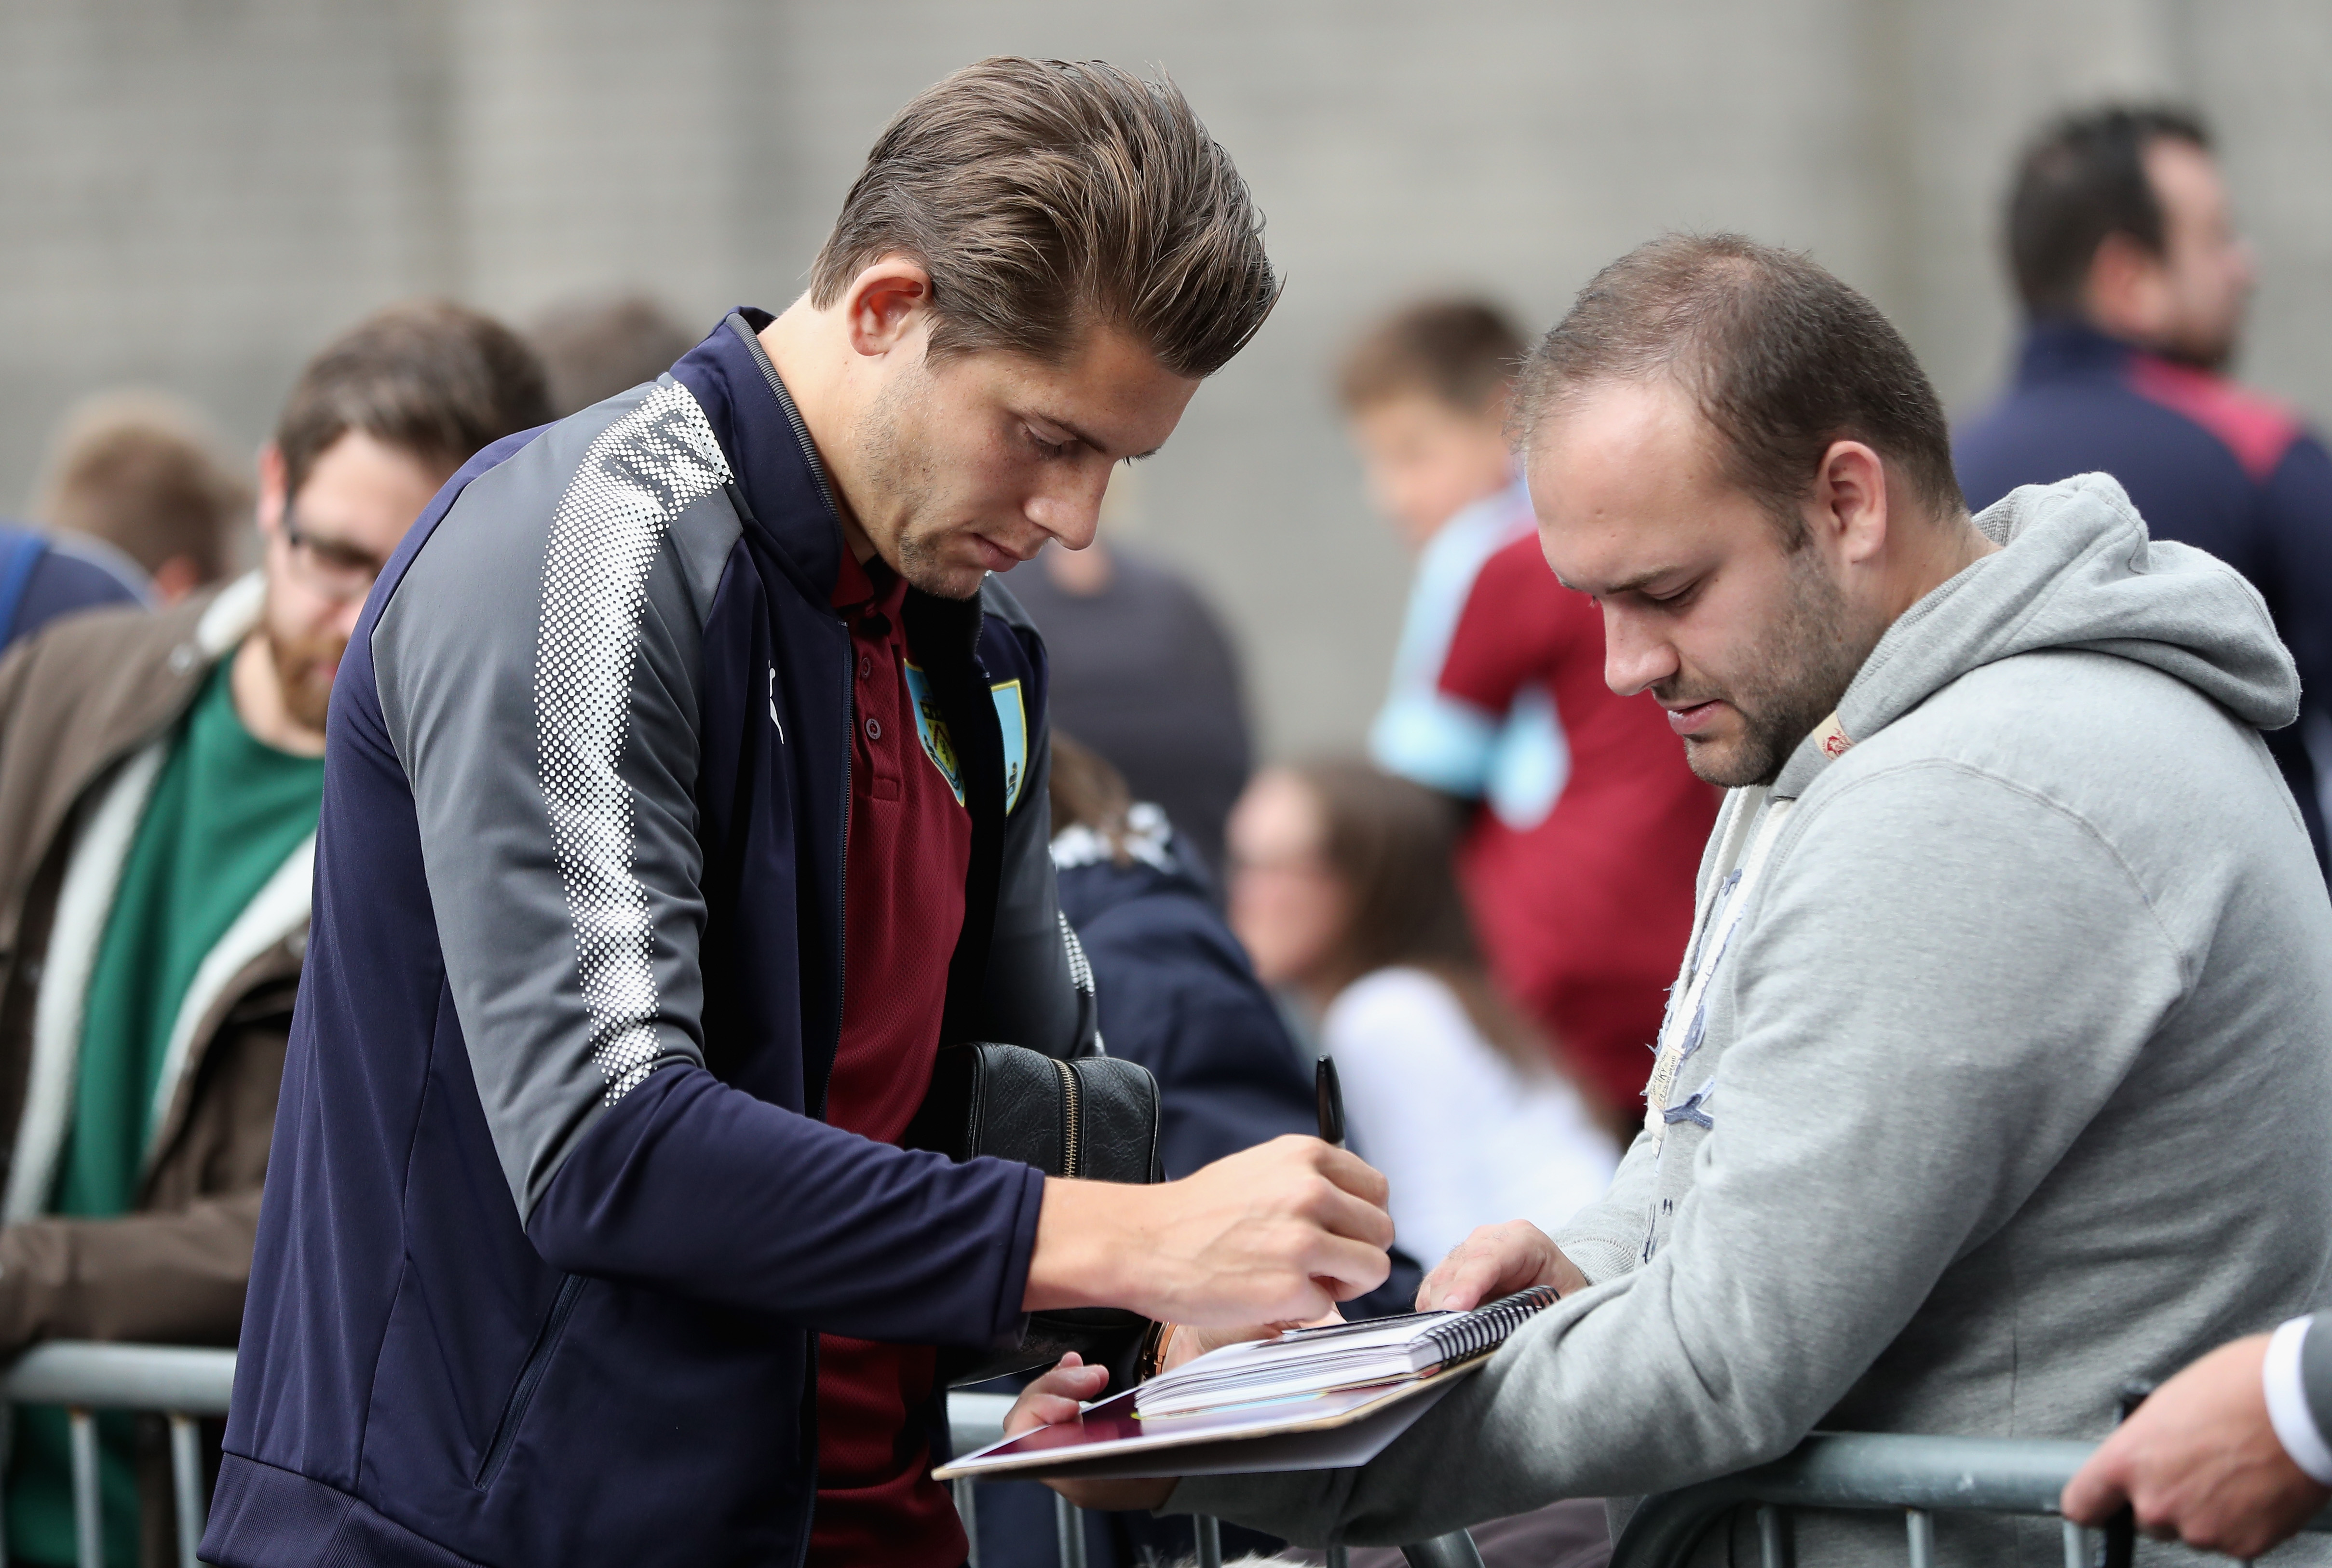 BURNLEY, ENGLAND - SEPTEMBER 23: James Tarkowski of Burnley signs autographs prior to the Premier League match between Burnley and Huddersfield Town at Turf Moor on September 23, 2017 in Burnley, England. (Photo by Ian MacNicol/Getty Images)